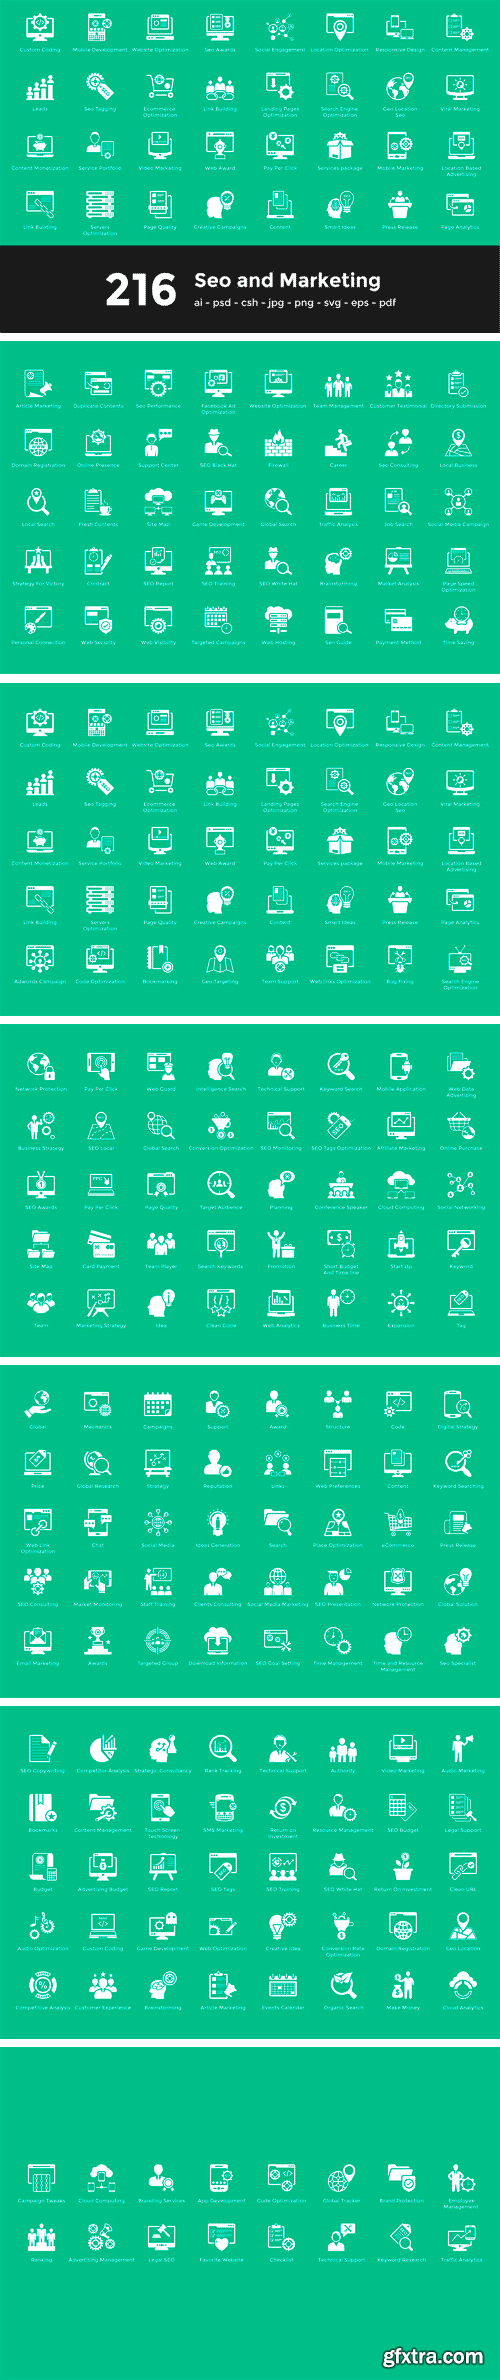 CM - 216 Seo and Marketing Vector Icons 2194490